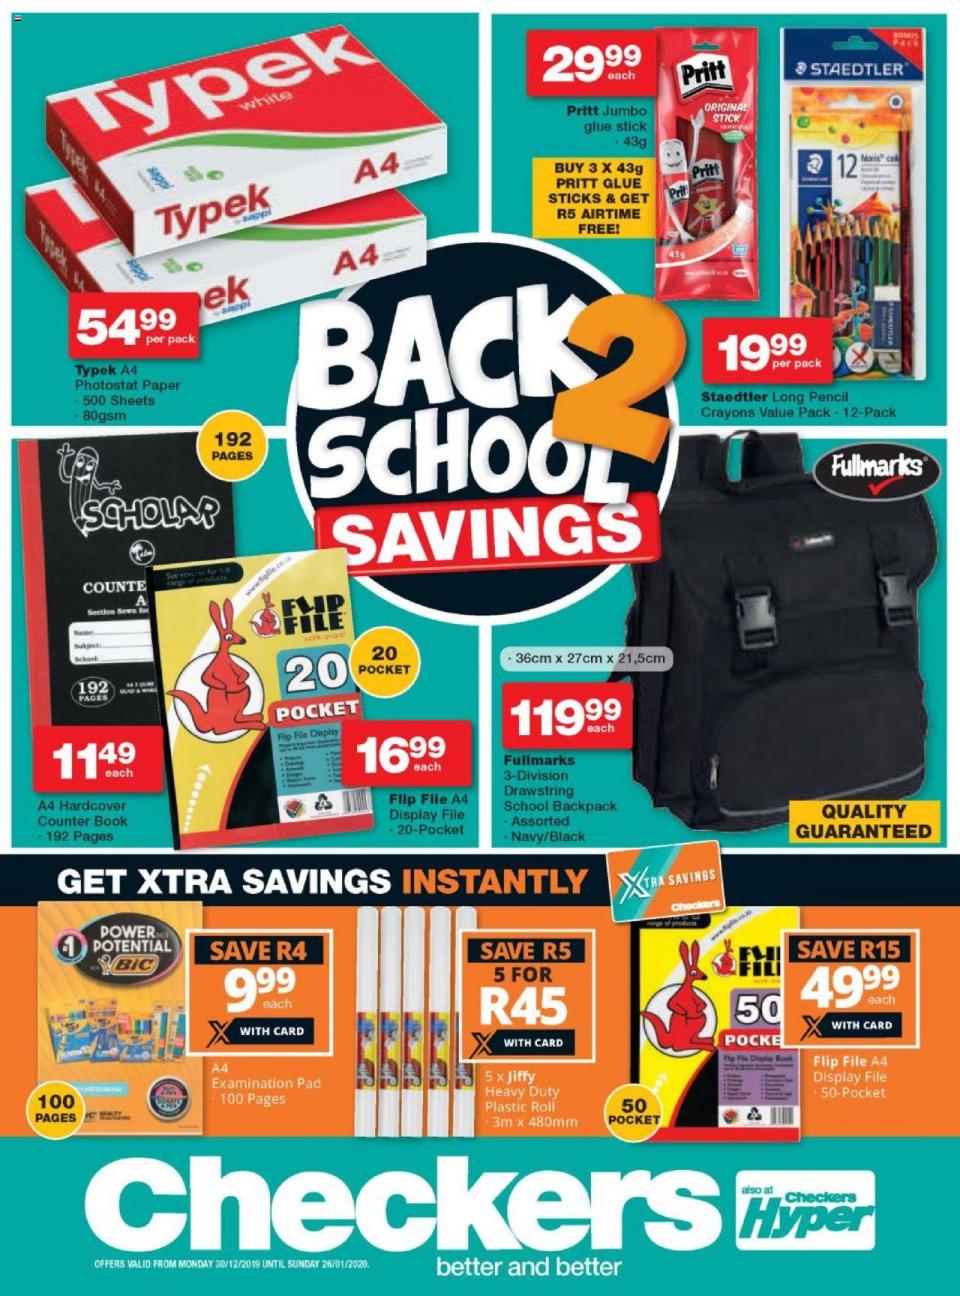 Checkers Specials Back To School Promotion 30 December 2019